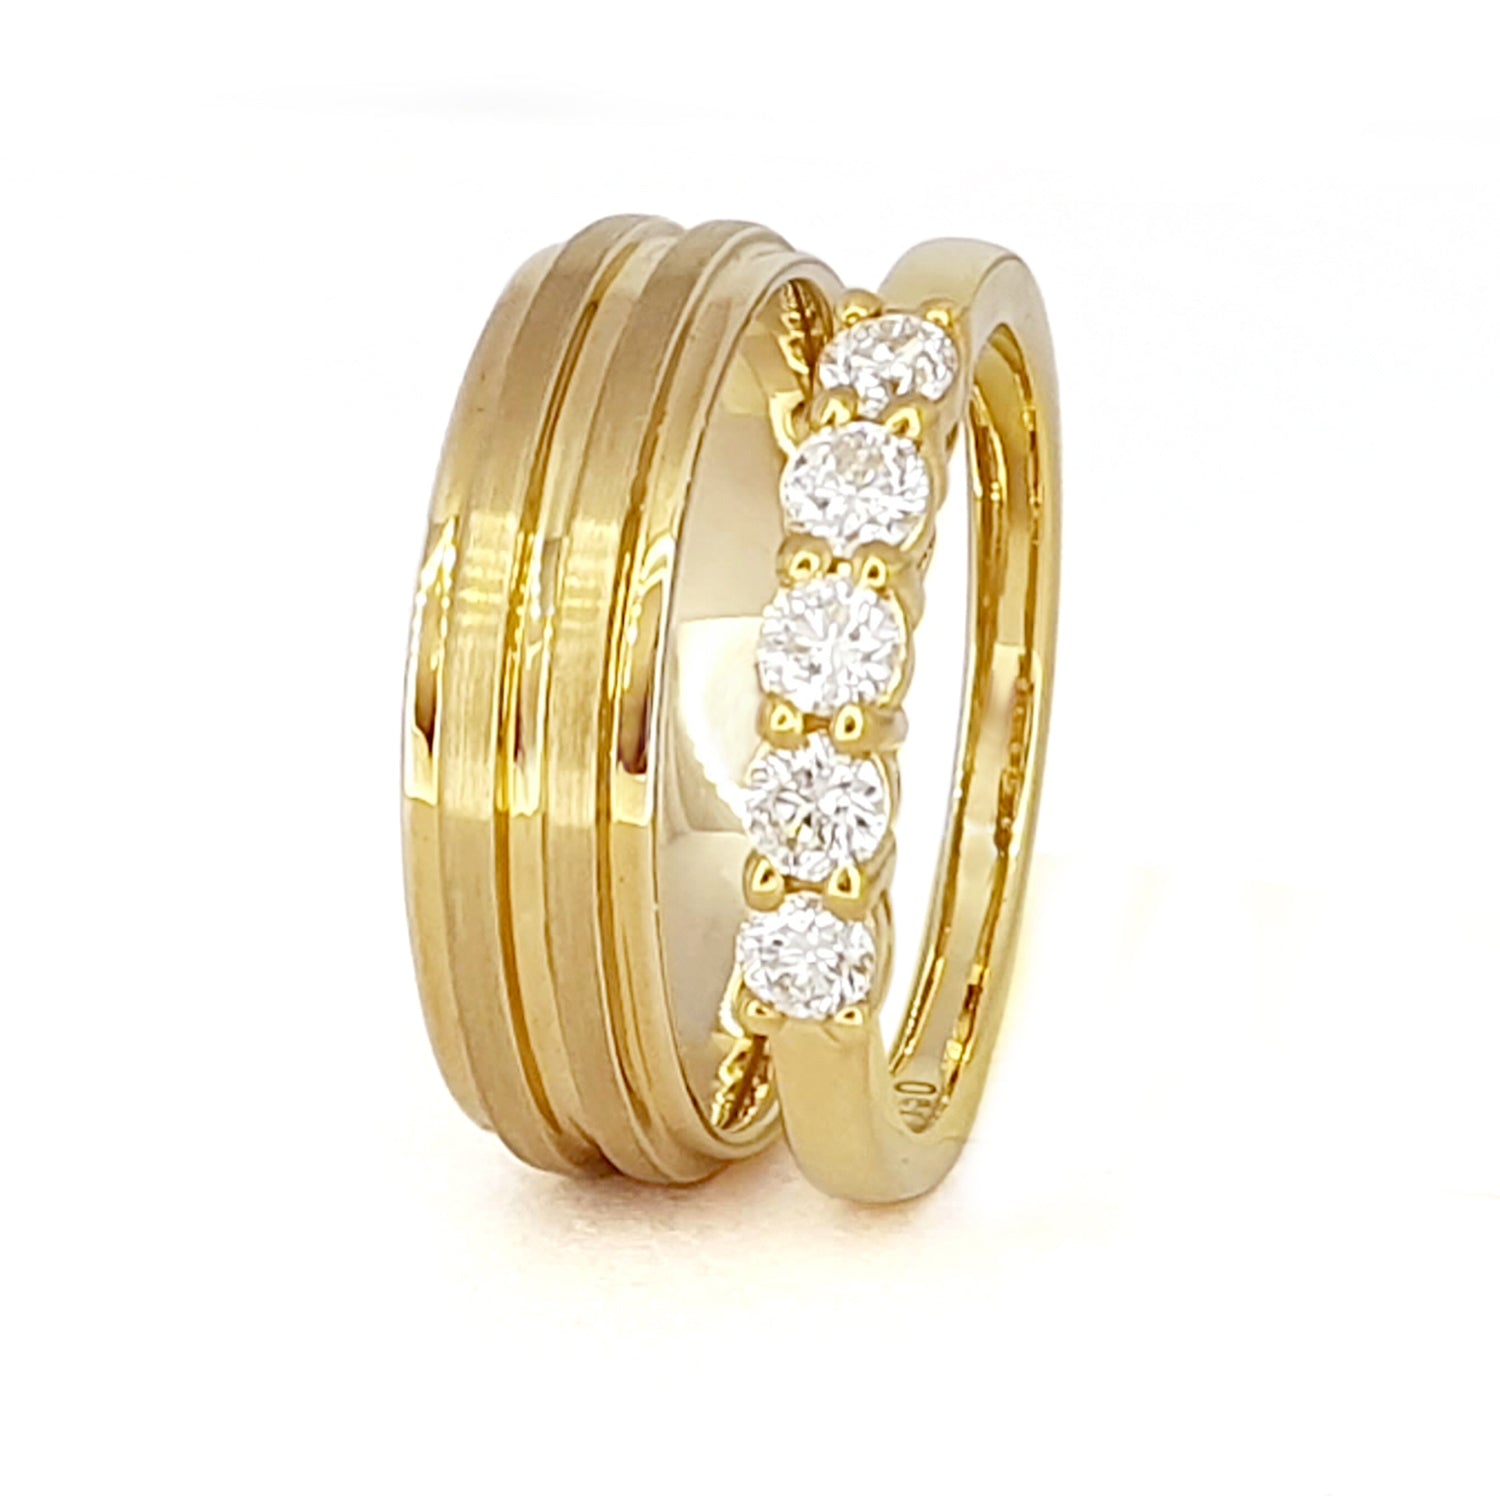 Matching Engagement Bands | 14k Gold Ring | Meicel Jewelry Store